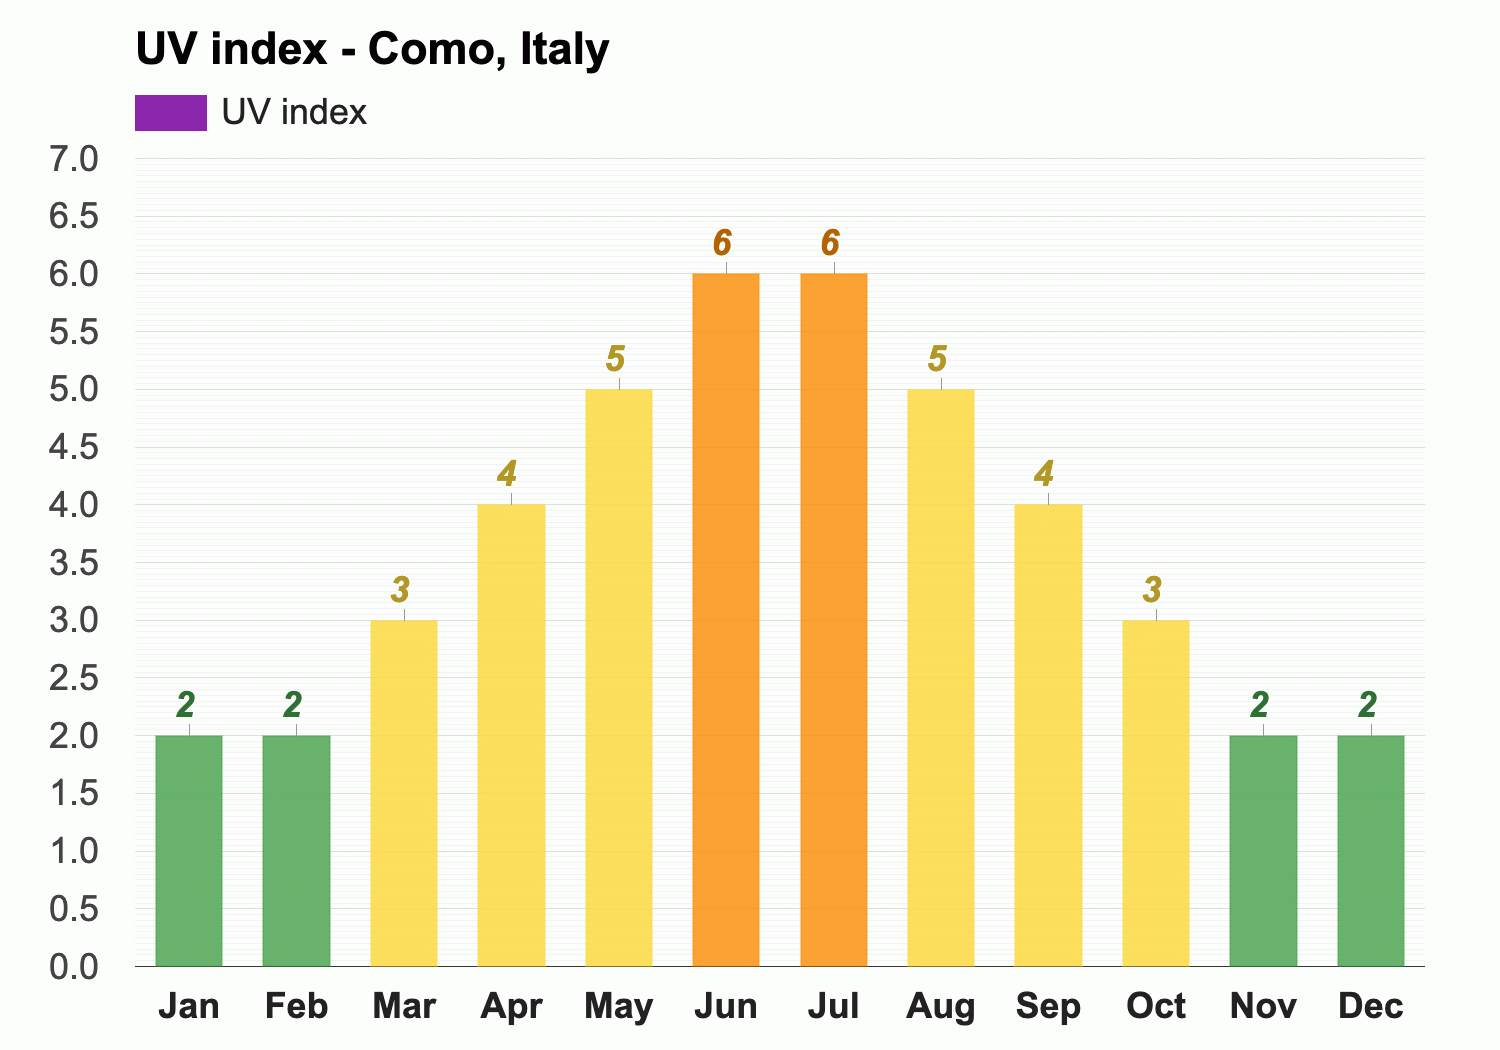 March Weather forecast - Spring forecast - Como, Italy